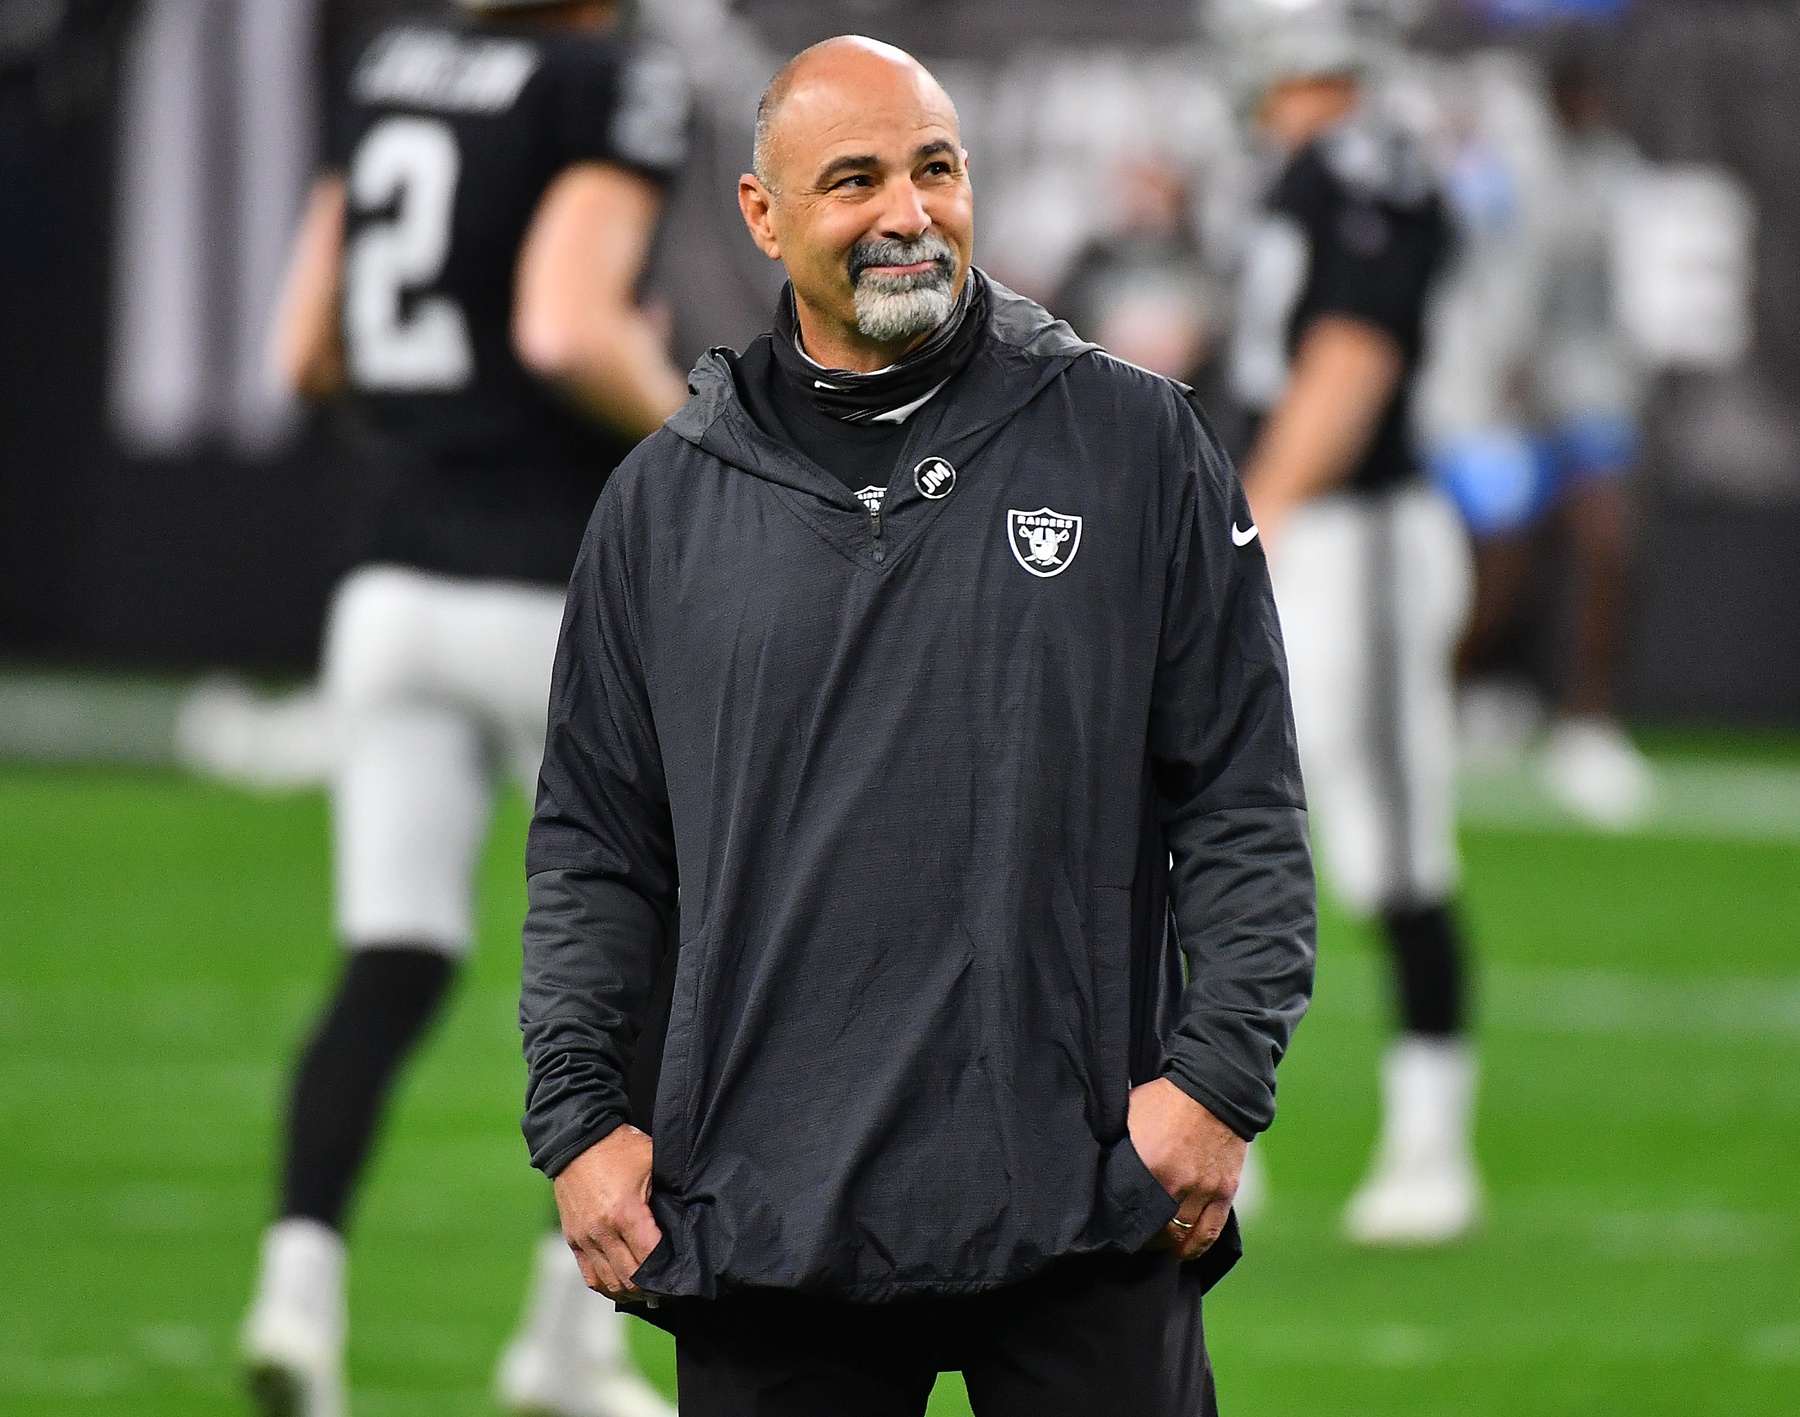 The Rich Bisaccia-led Las Vegas Raiders had everyone smiling during their improbably 2021 NFL Playoff run.